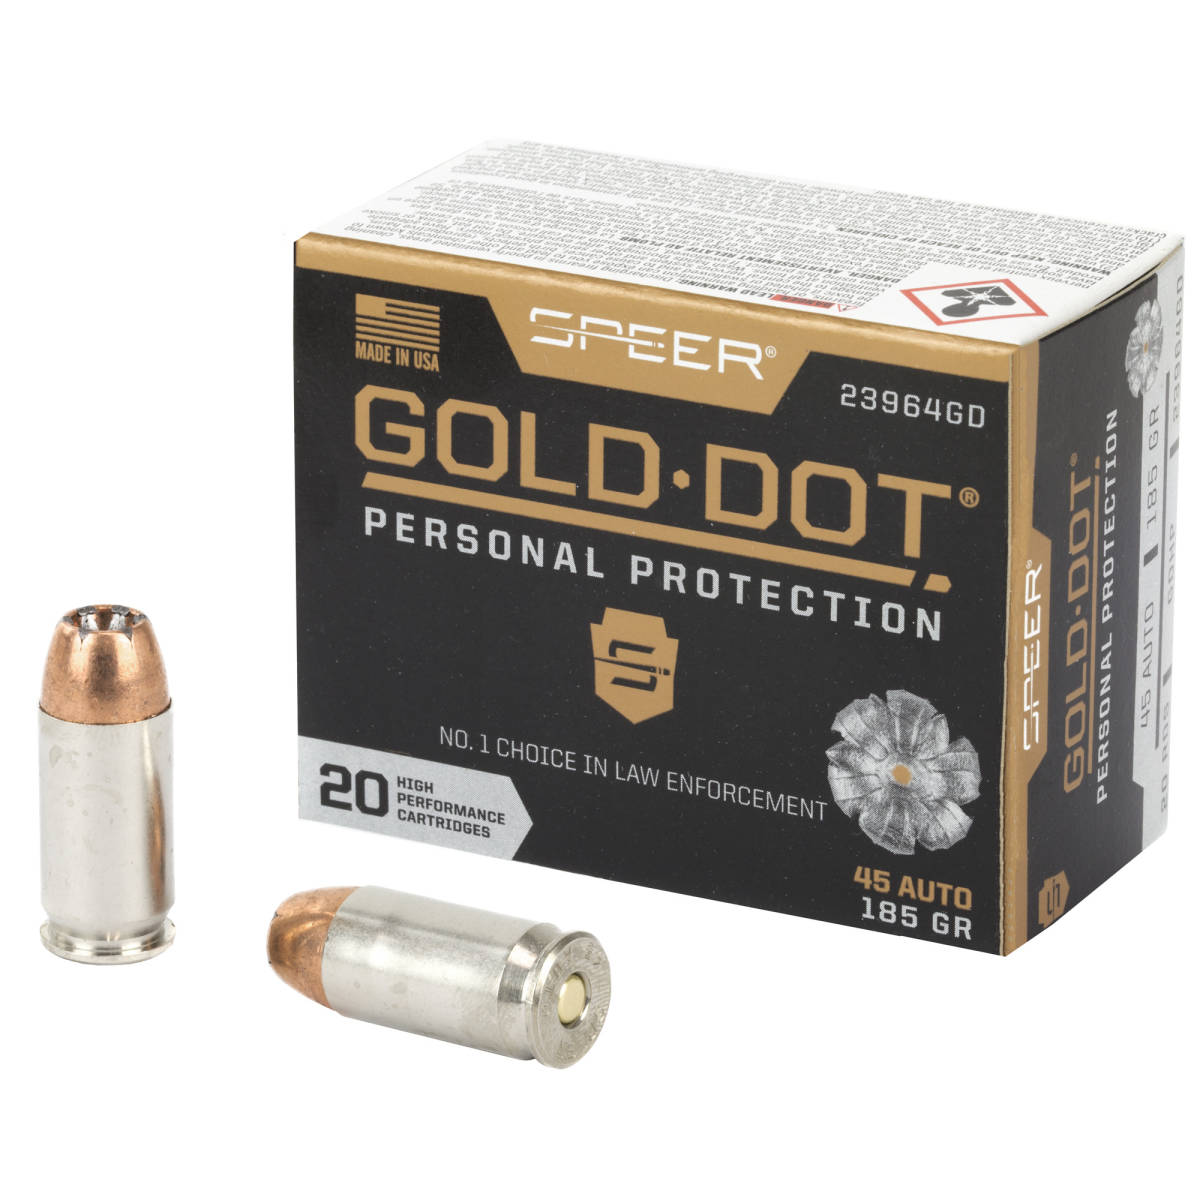 Speer 23964GD Gold Dot Personal Protection 45 ACP 185 gr Hollow Point 20-img-0